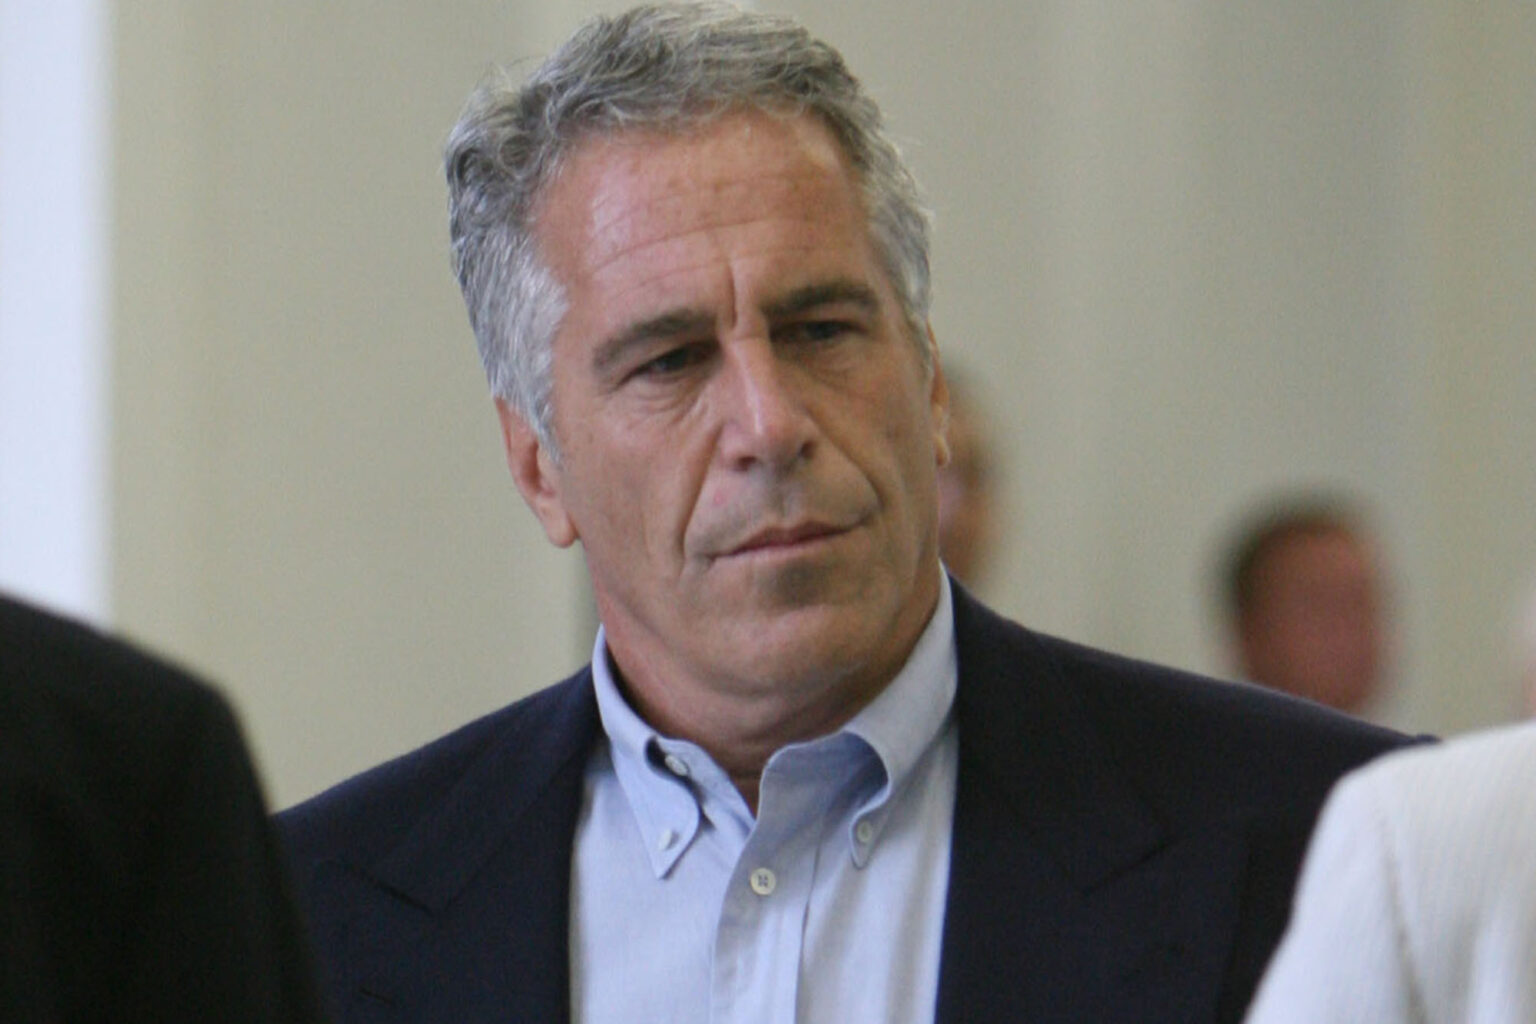 A new lawsuit in the news agaisnt Ghislaine Maxwell is cluing the public into Jeffrey Epstein's constant need for sex. How did this affect Epstein?